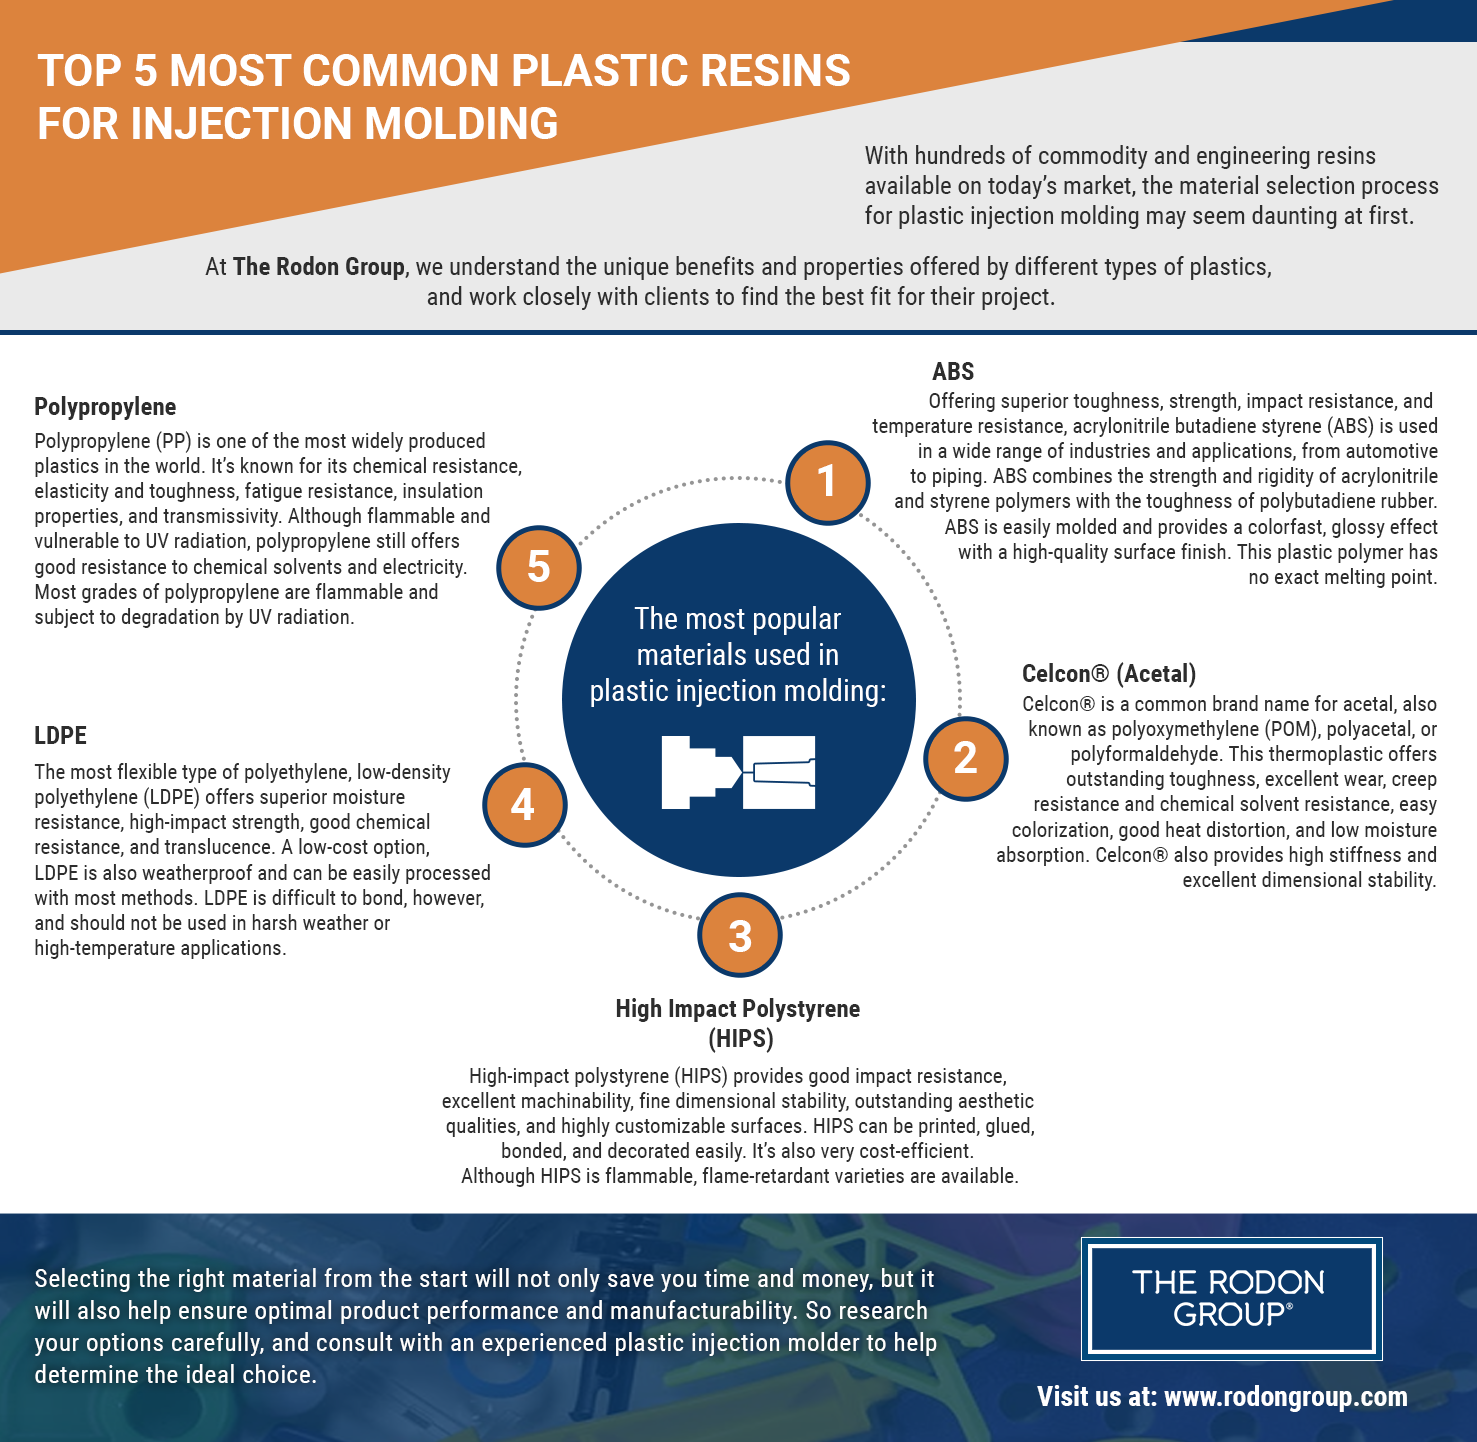 Top 5 Most Common Plastic Resins for Injection Molding